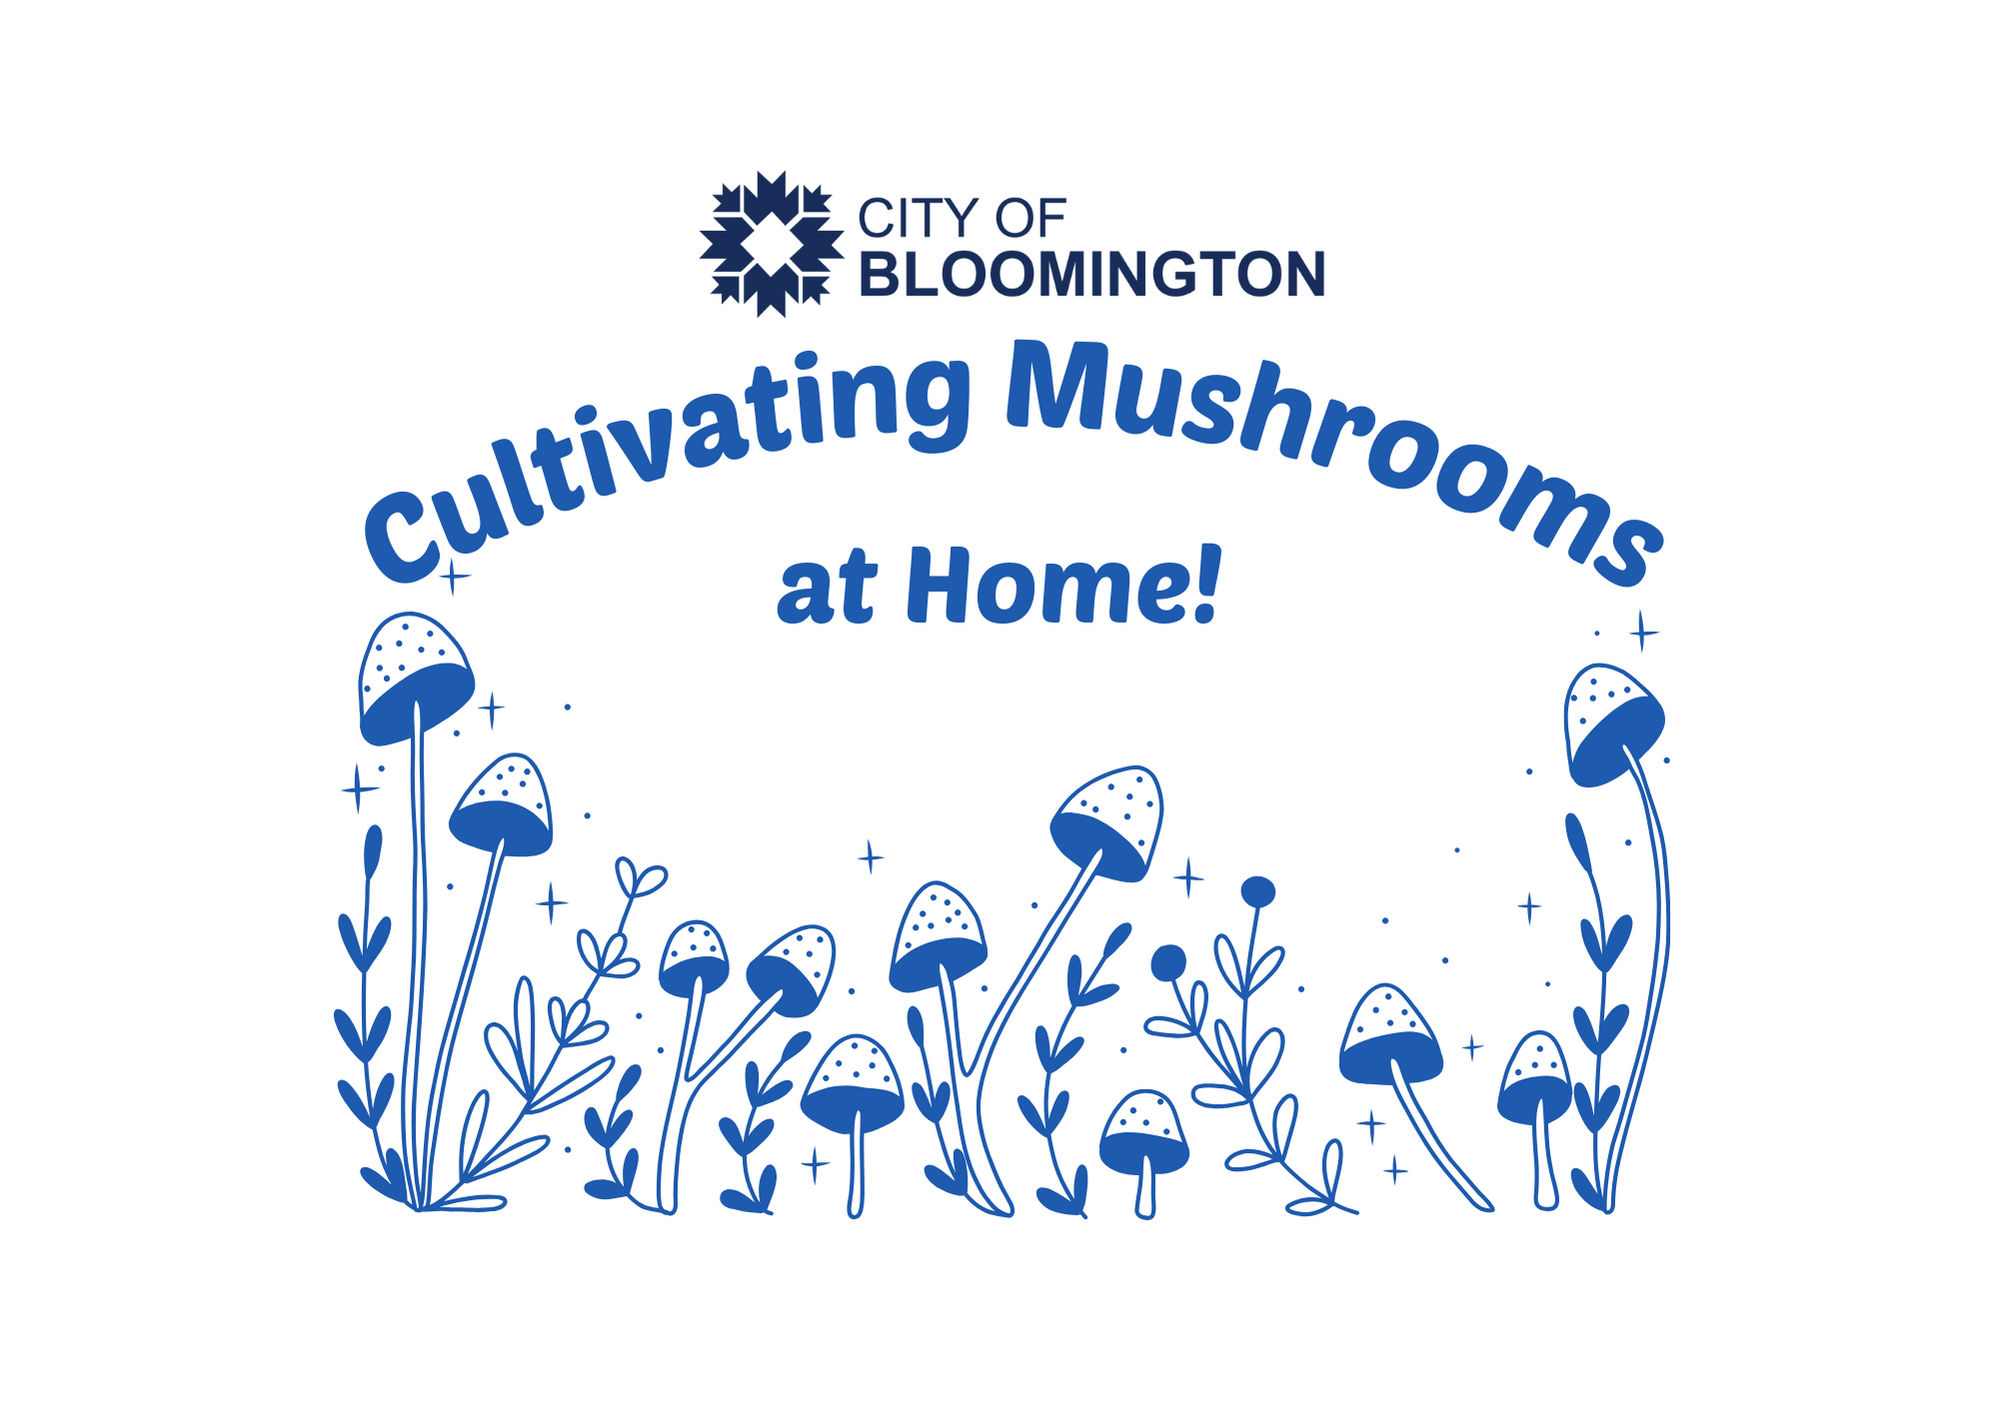 Cultivating Mushrooms at Home